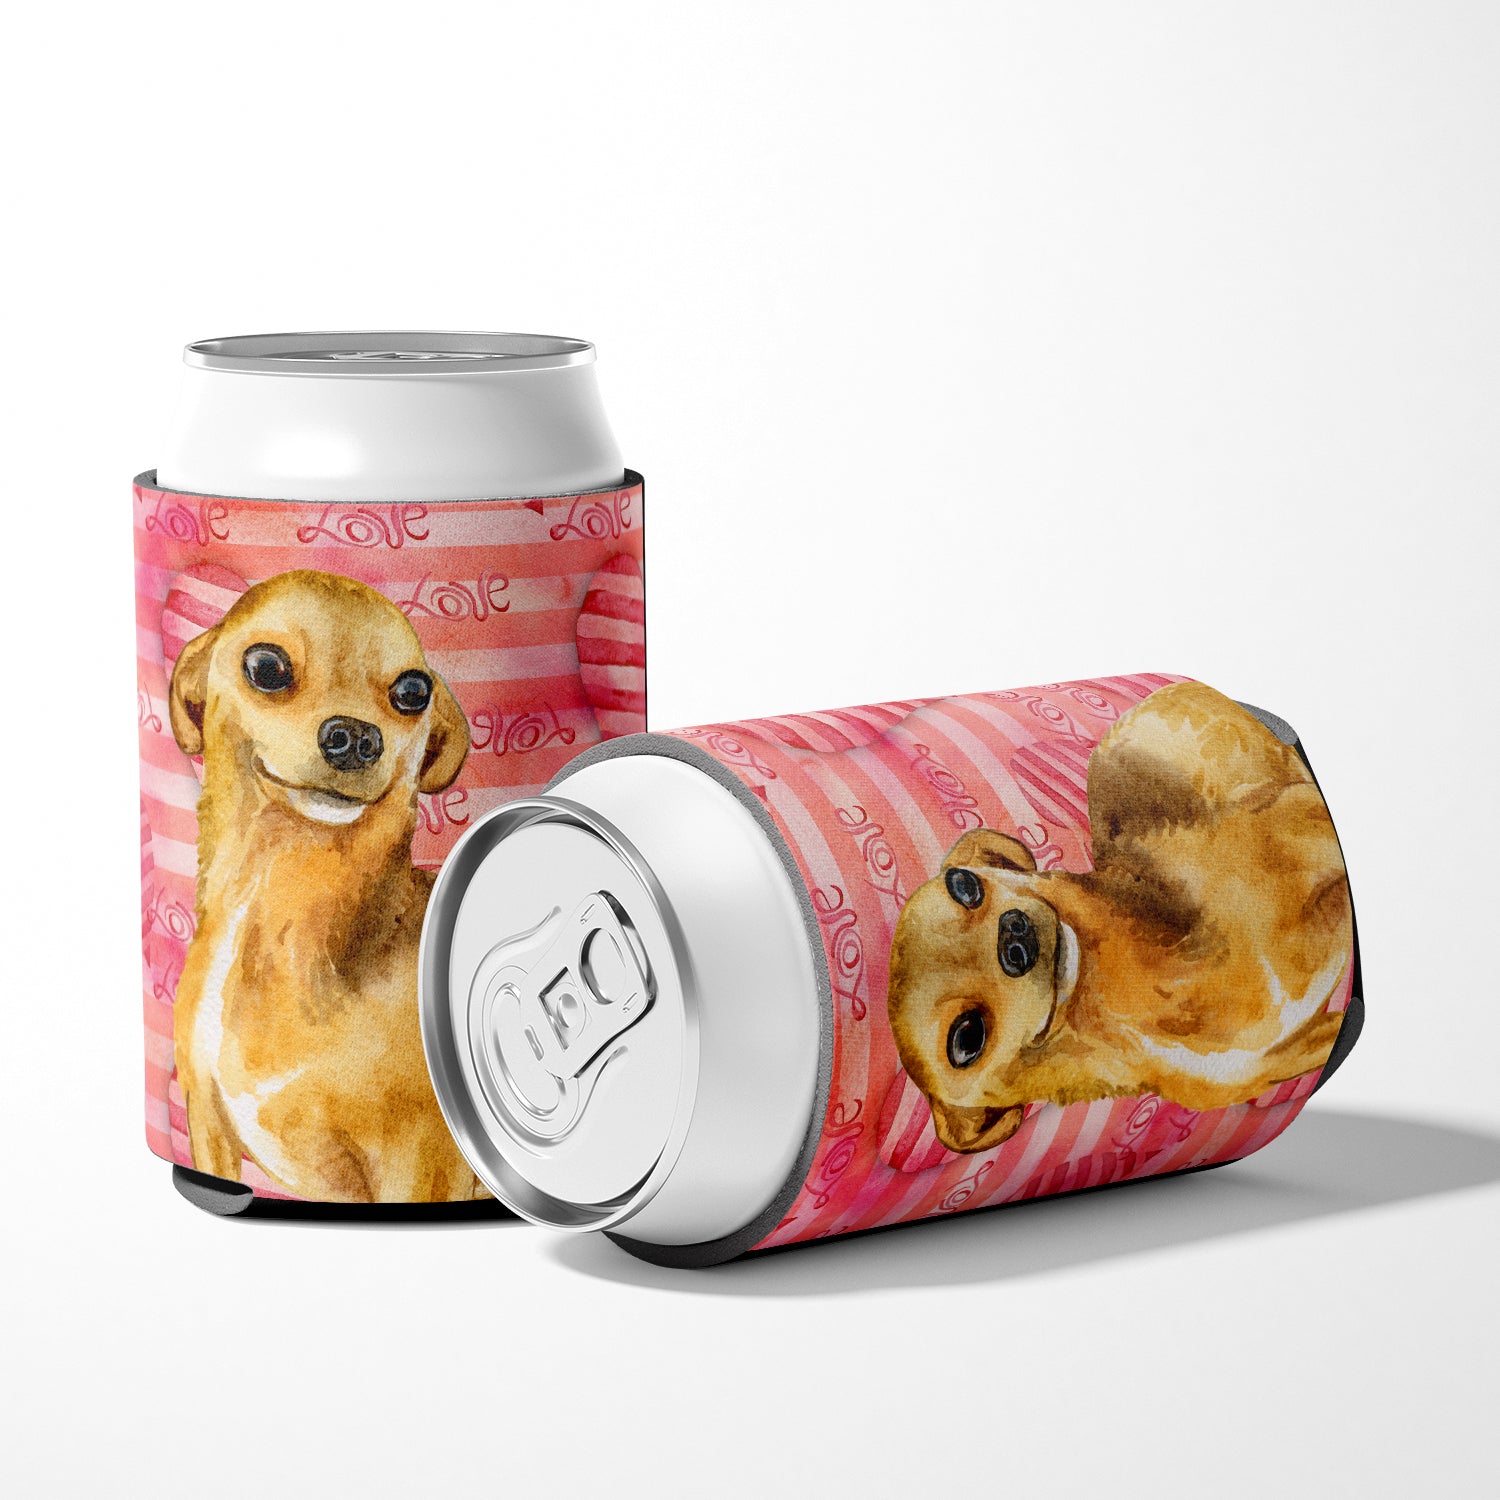 Chihuahua Love Can or Bottle Hugger BB9745CC